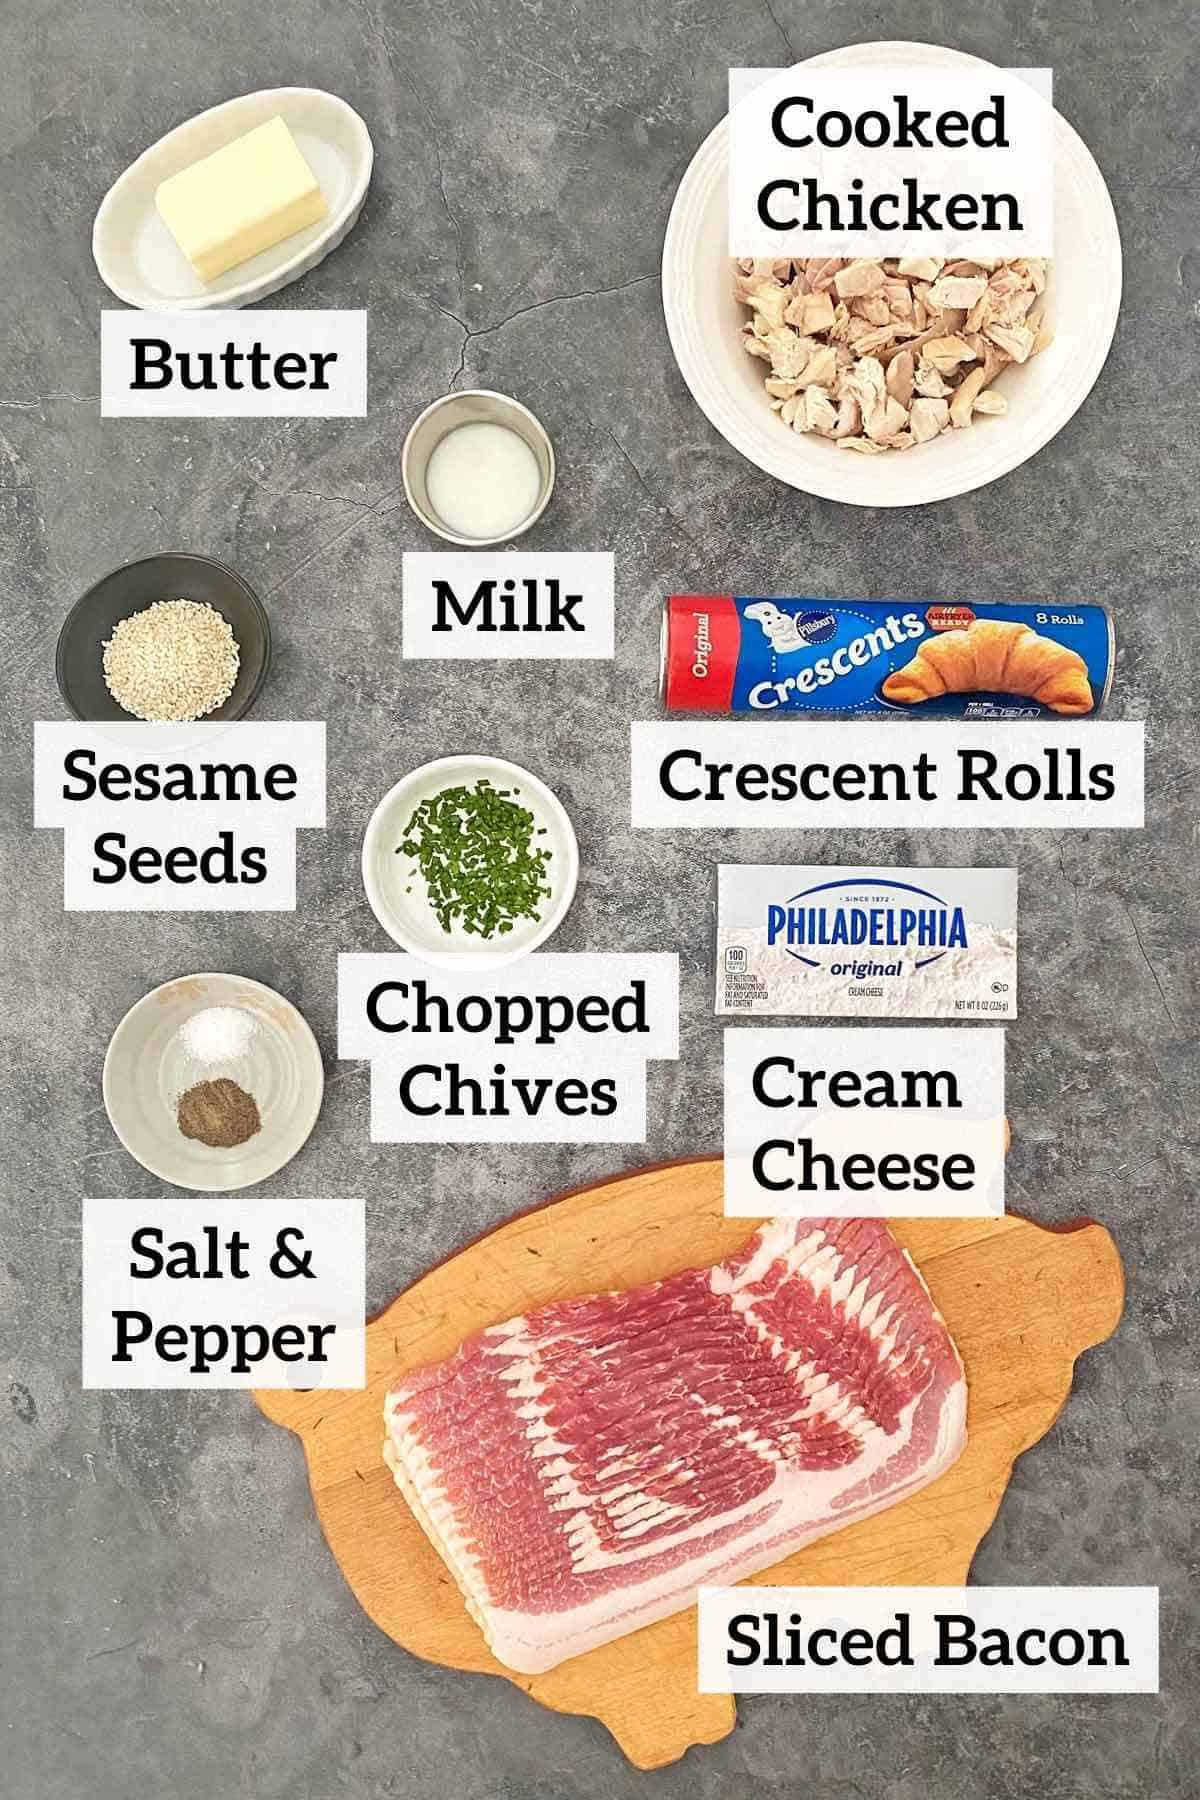 Chicken, bacon, cream cheese, and other ingredients for chicken pockets.